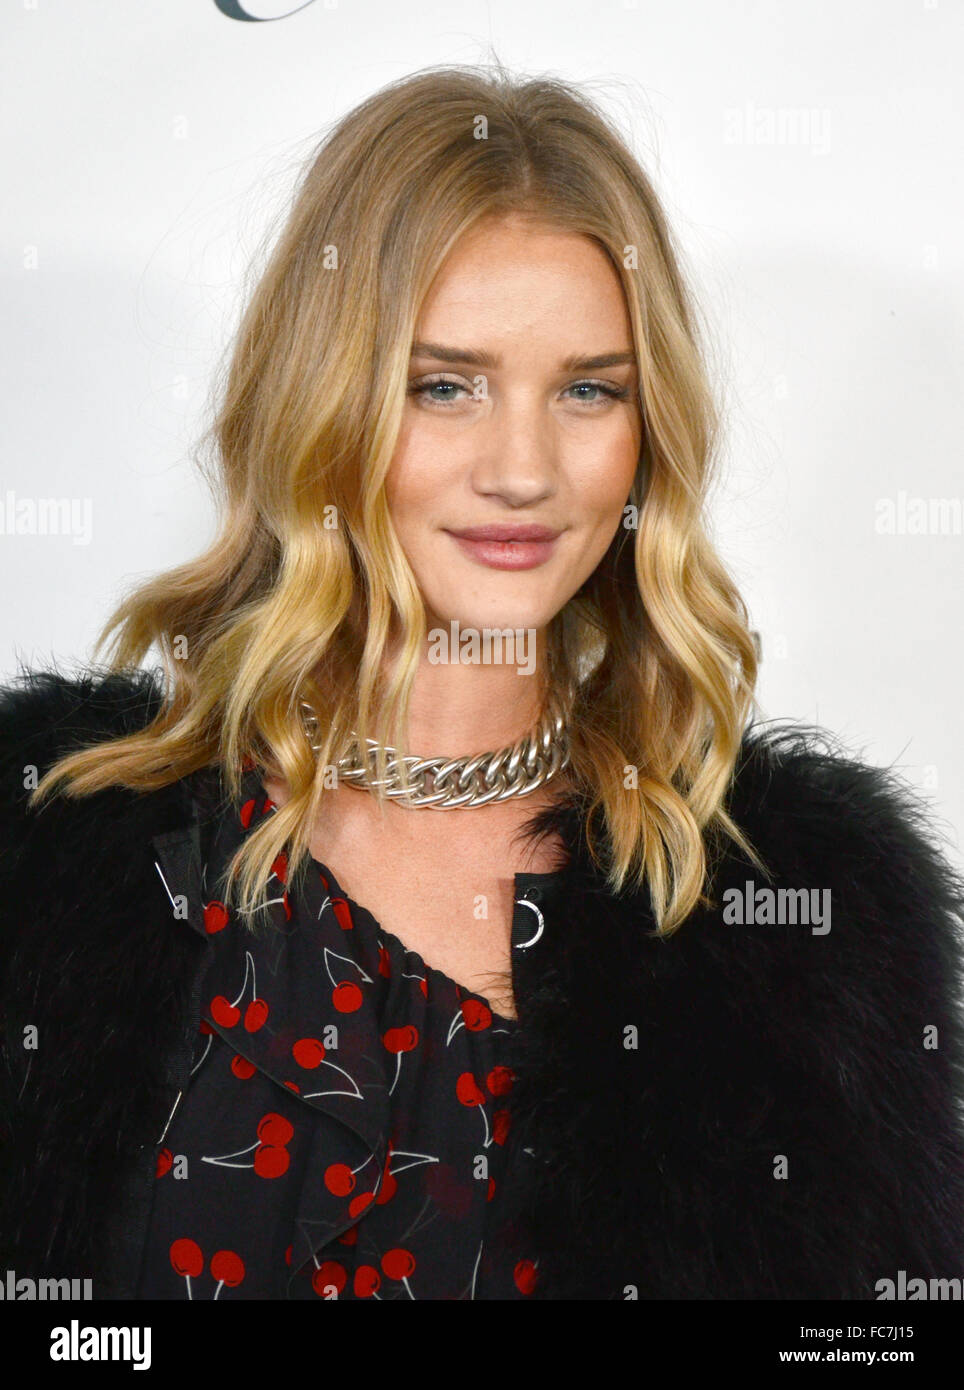 Las Vegas, Nevada, USA. 20th Jan, 2016. Model Rosie Hungtington Whiteley attends the opening night red carpet for Jennifer Lopez ''All I Have'' musical residency on January 20, 2016 at the Axis Theater inside Planet Hollywood Resort & Casino in Las Vegas Nevada. Credit:  Marcel Thomas/ZUMA Wire/Alamy Live News Stock Photo